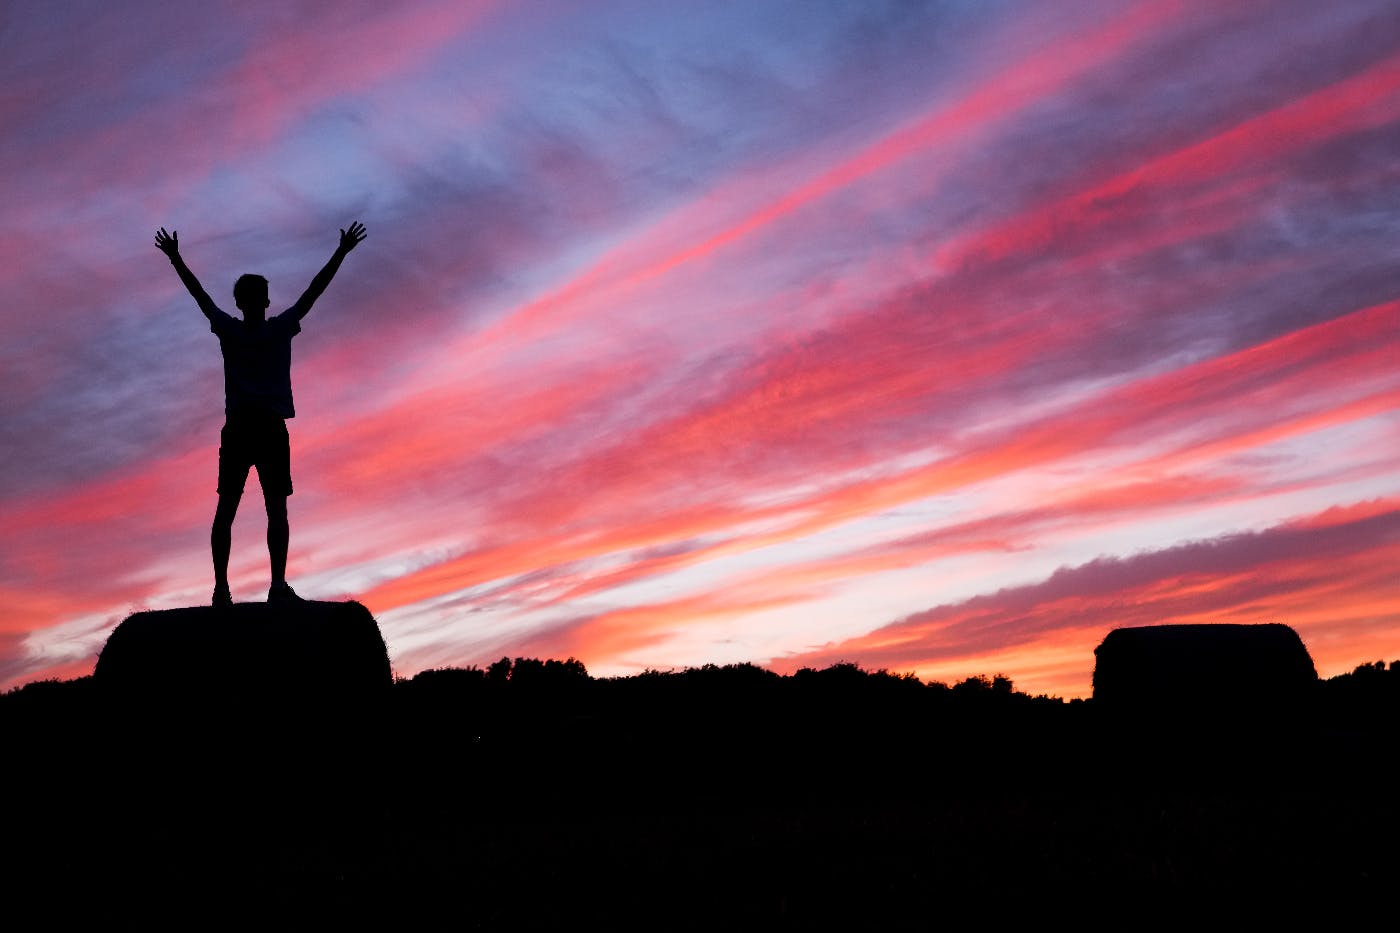 A man, arms raised standing atop a rock in silhouette in the sunset